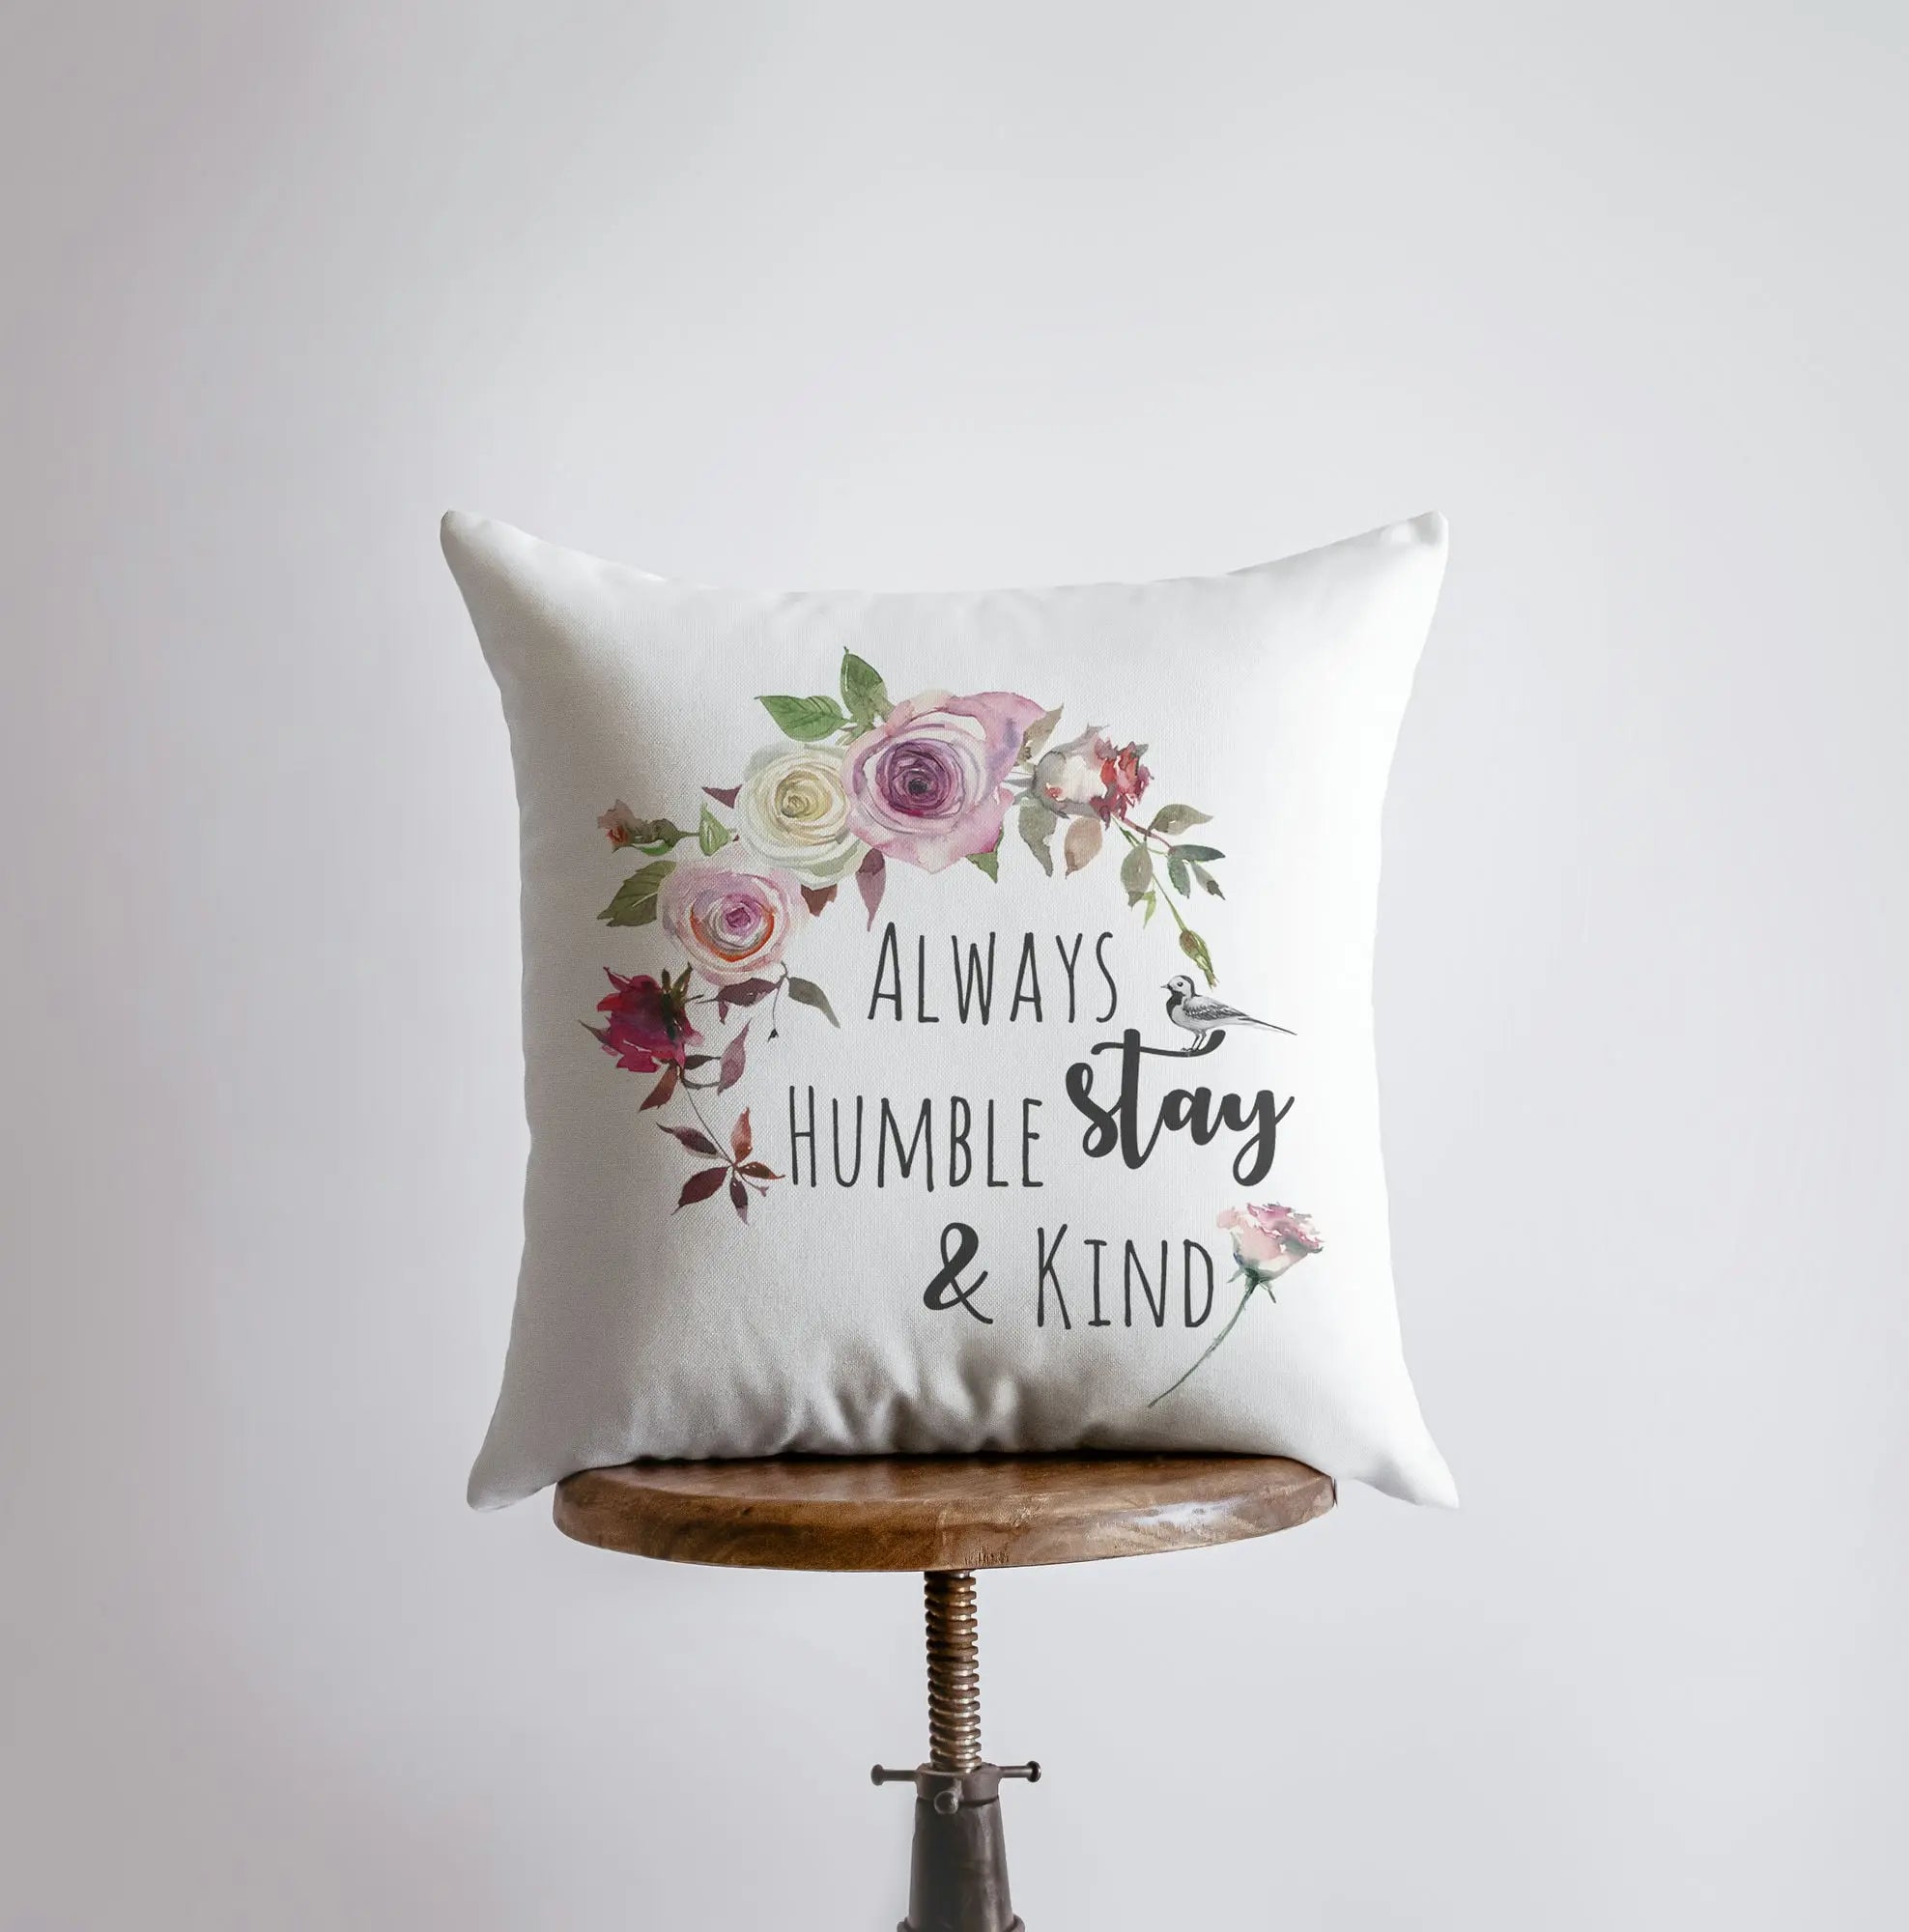 Inspirational You are Amazing Throw Pillow Cover 18x18